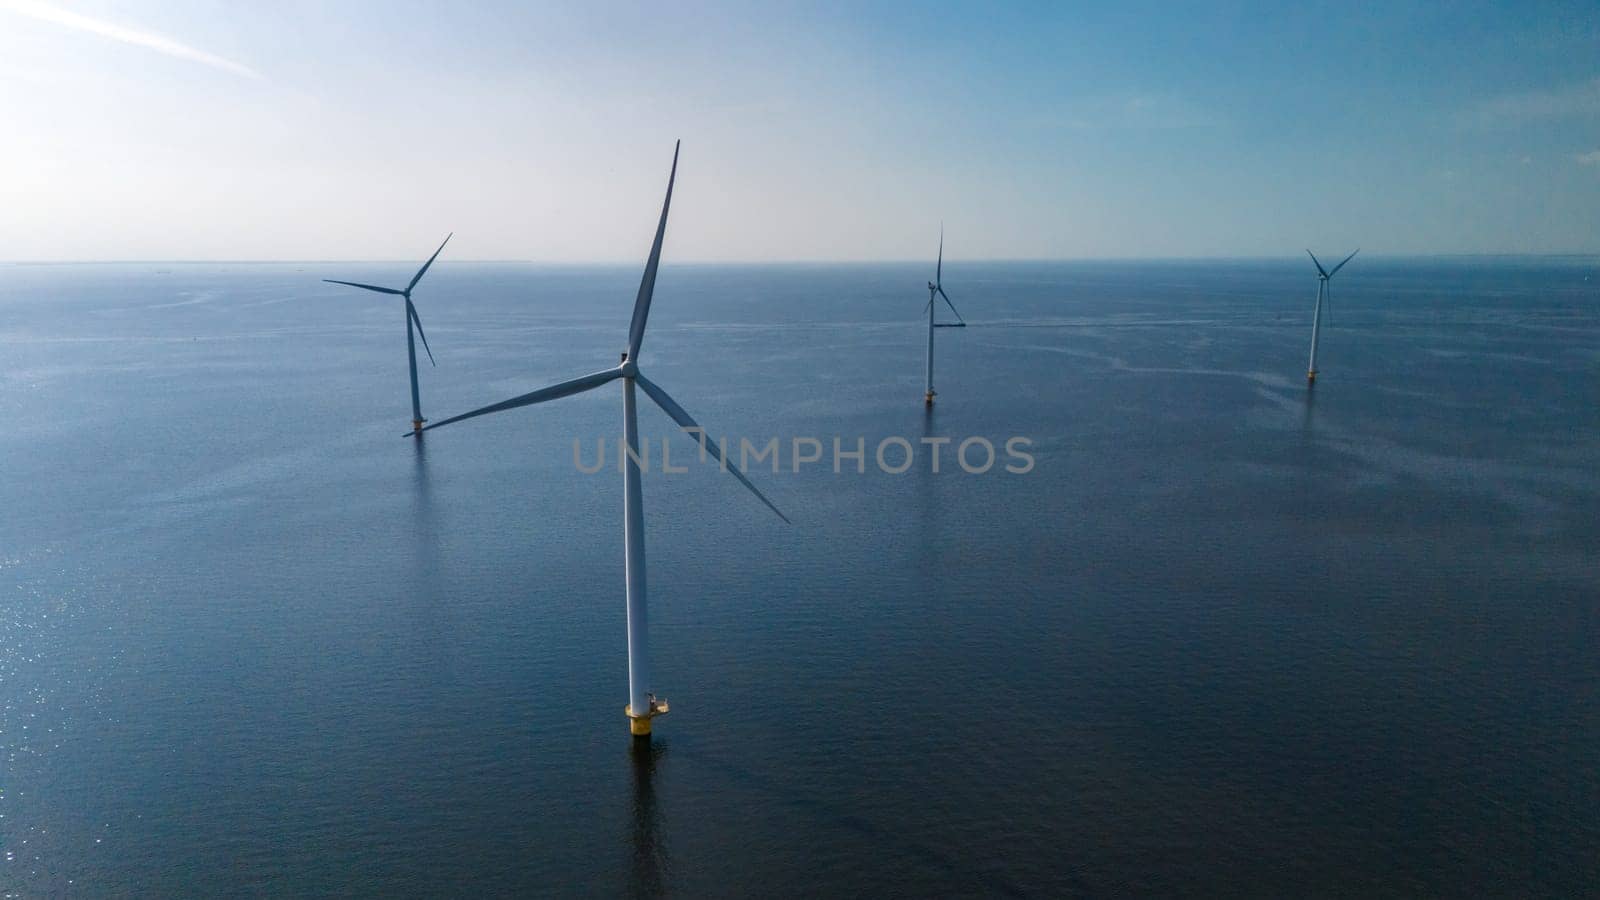 A group of wind turbines stand tall, floating gracefully in the ocean, harnessing the power of the wind to generate clean energy by fokkebok